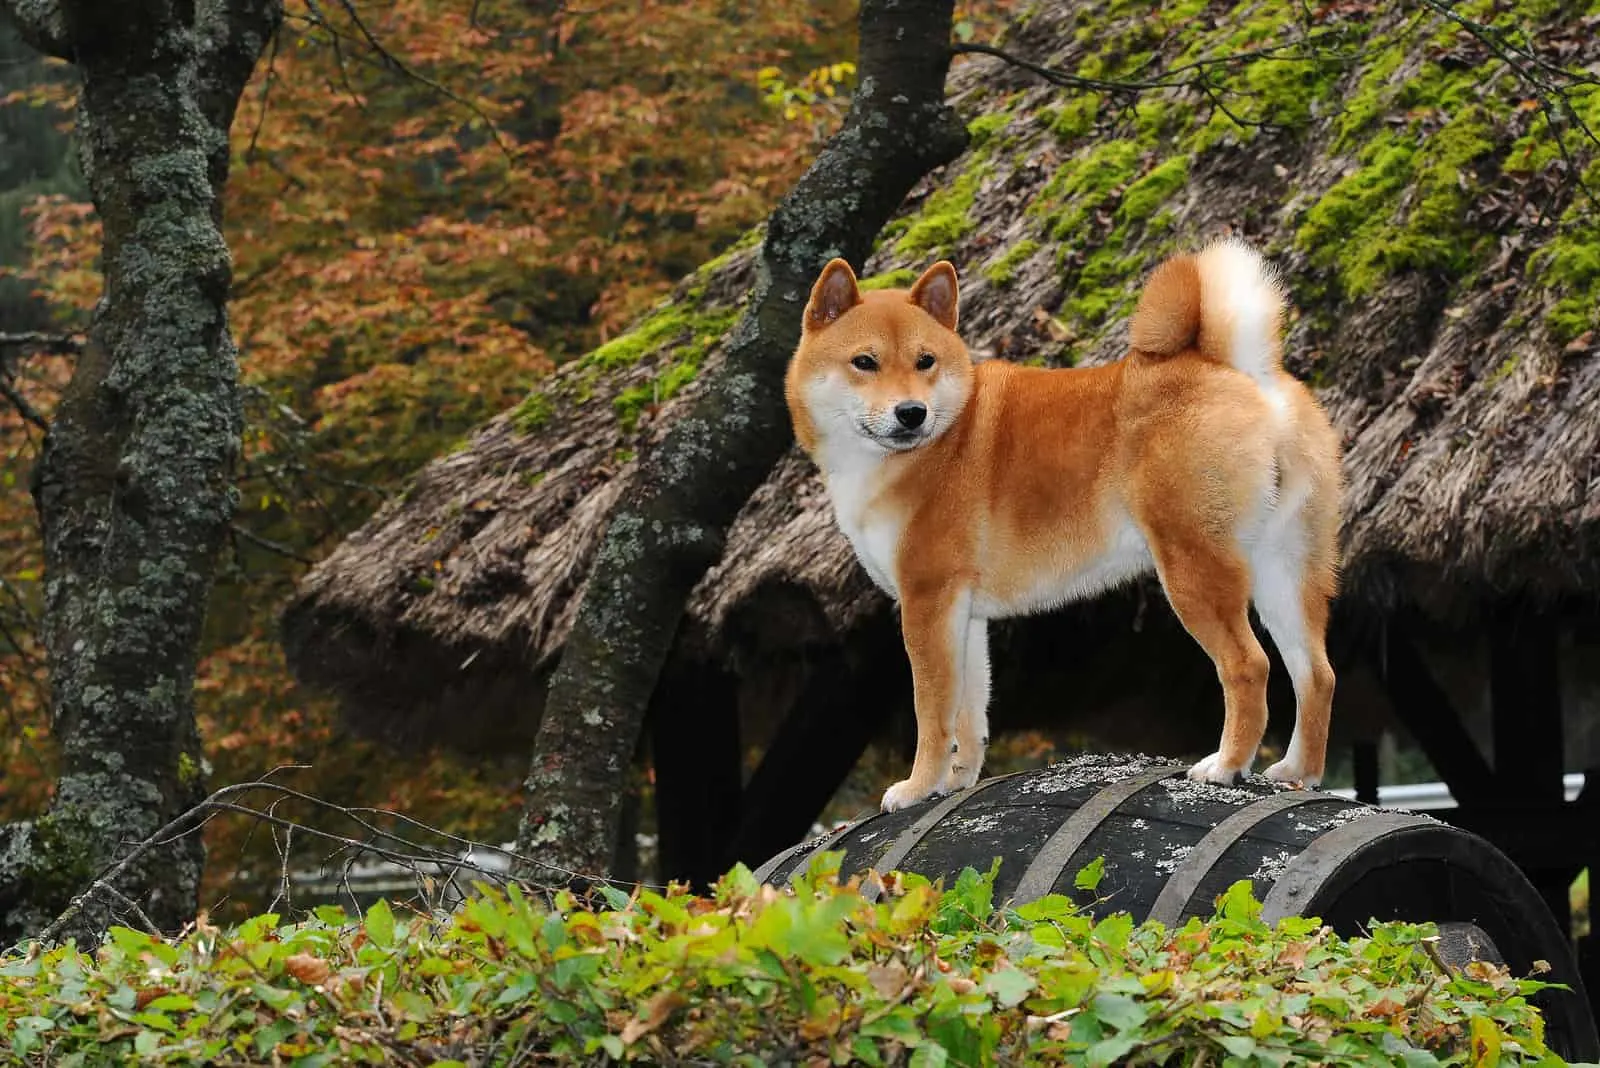 Shiba Inu stands on the barrel and looks around